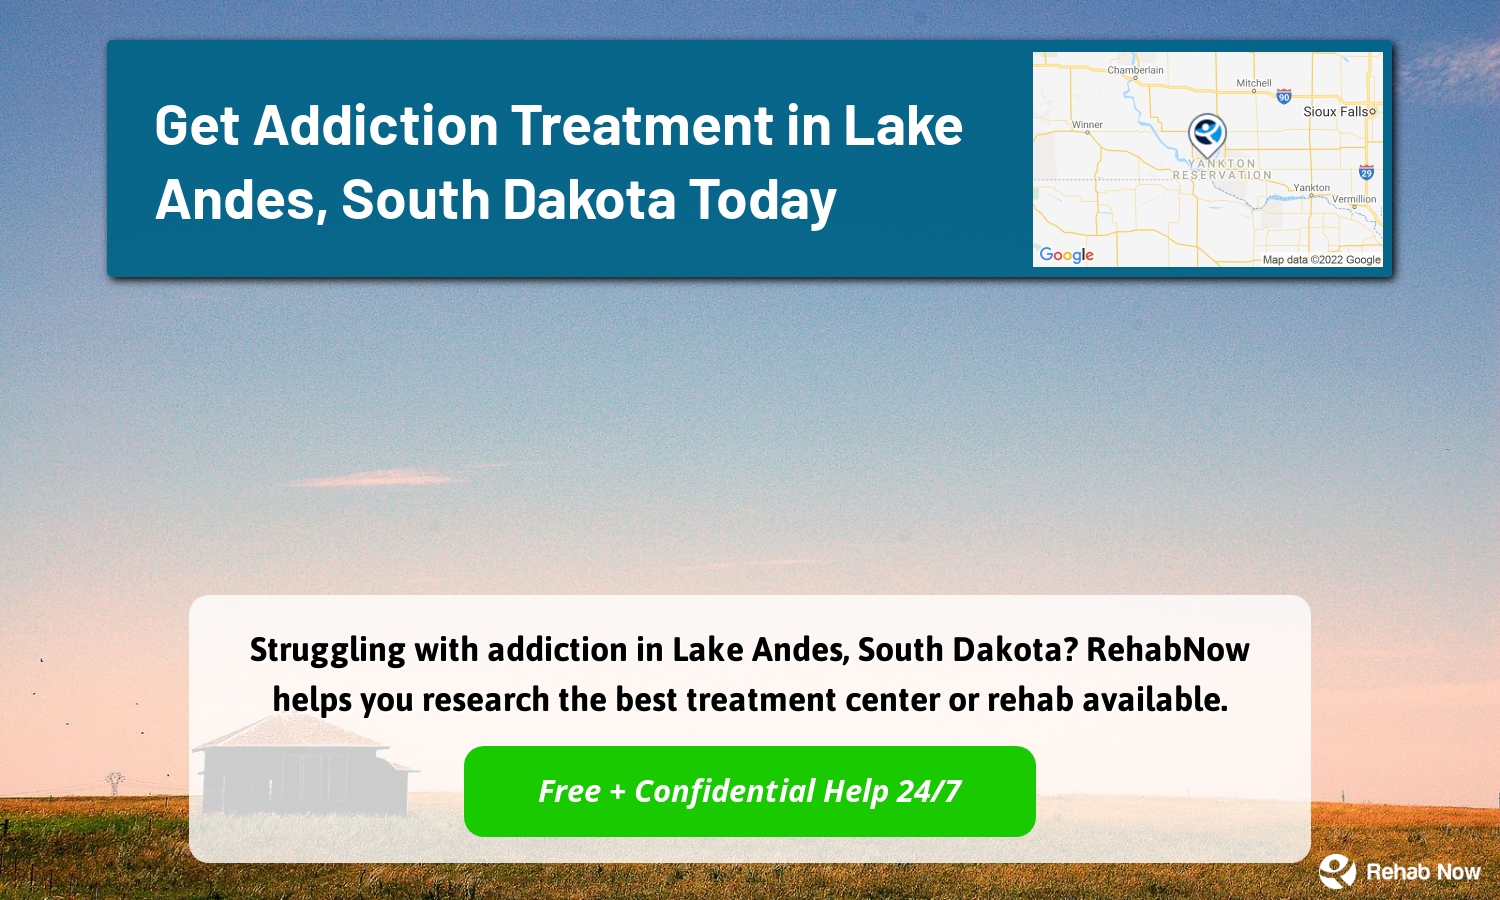 Struggling with addiction in Lake Andes, South Dakota? RehabNow helps you research the best treatment center or rehab available.